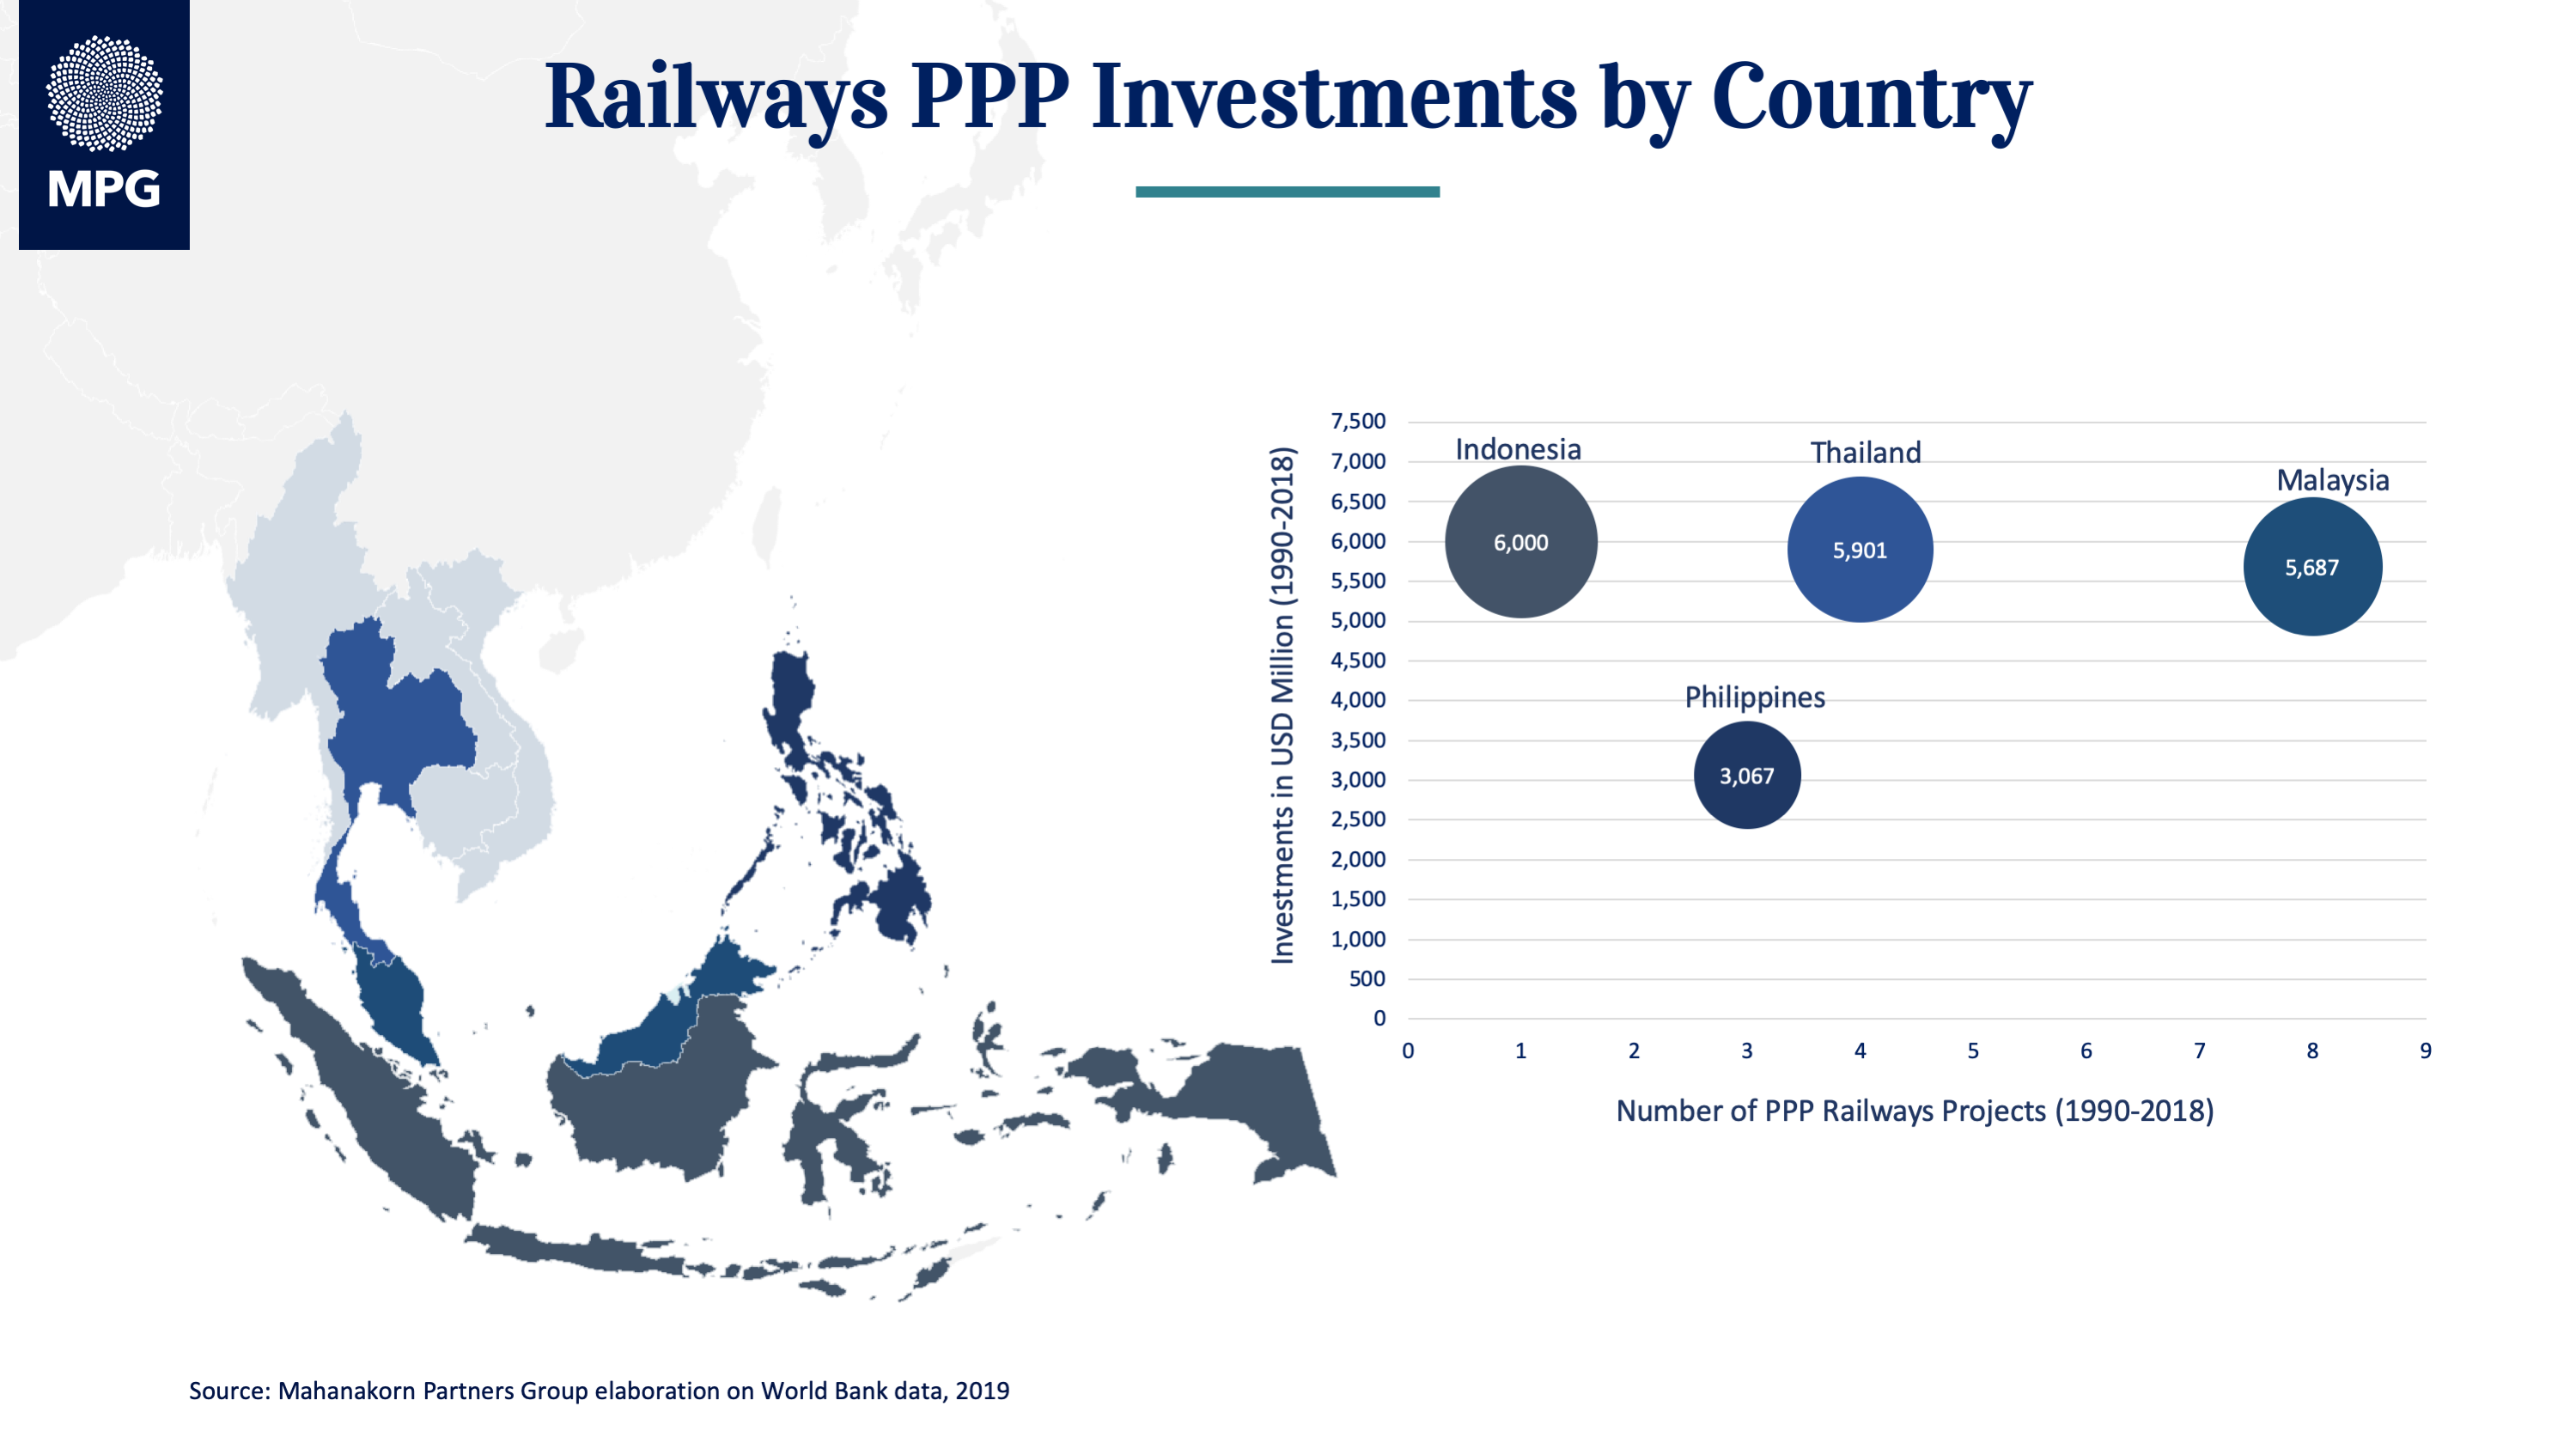 The 2019 ASEAN Rail Infrastructure & Expansion Summit